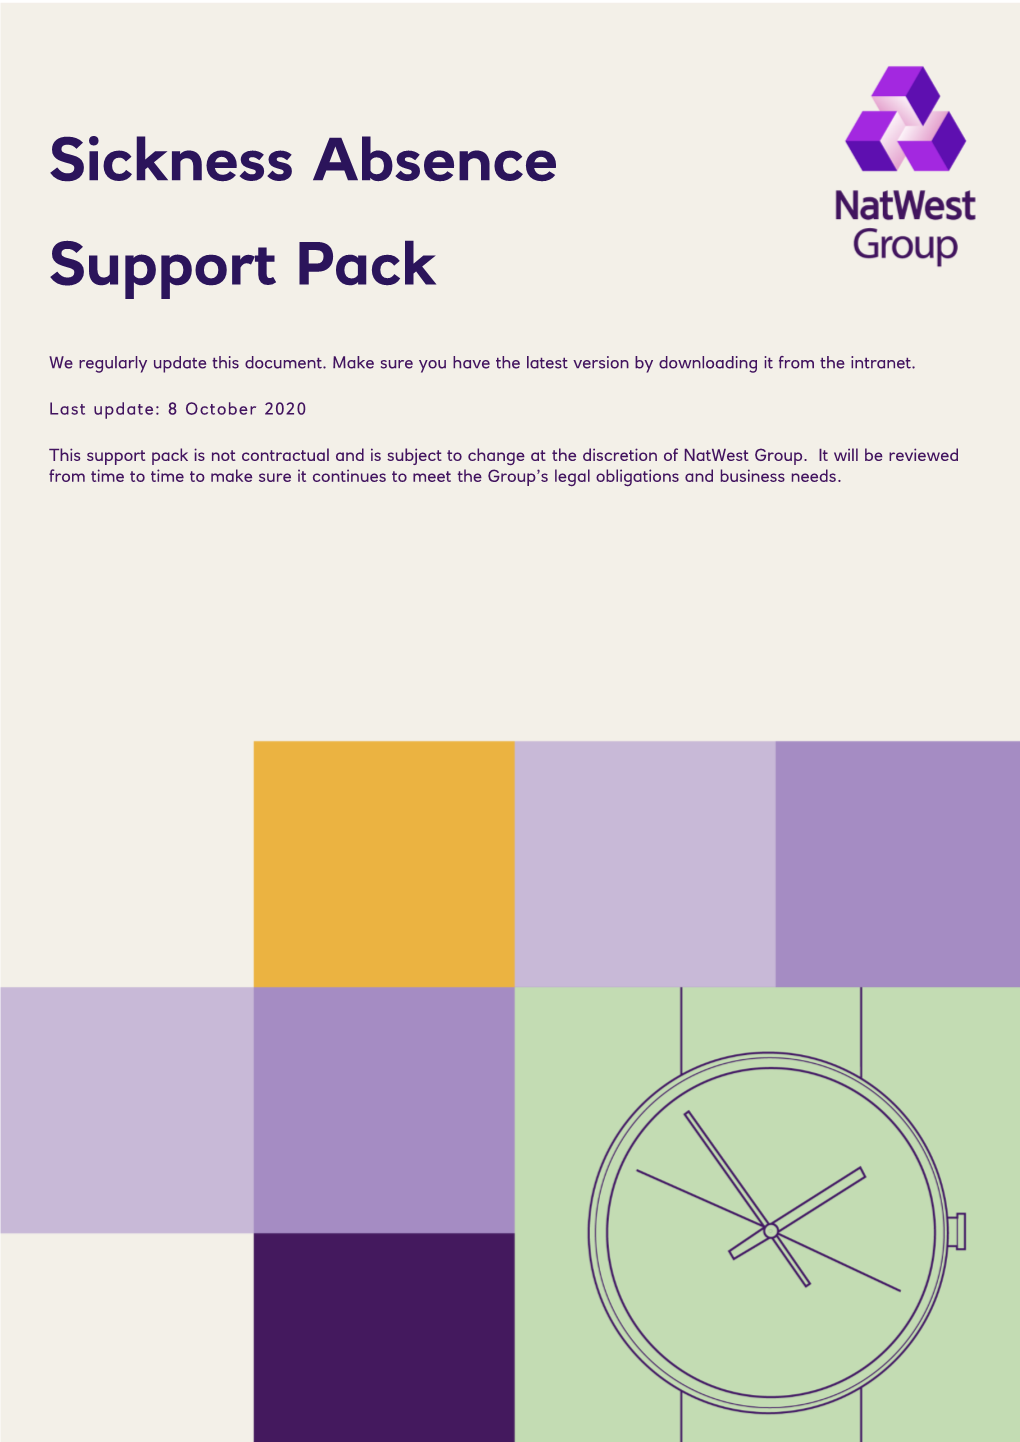 Sickness Absence Support Pack